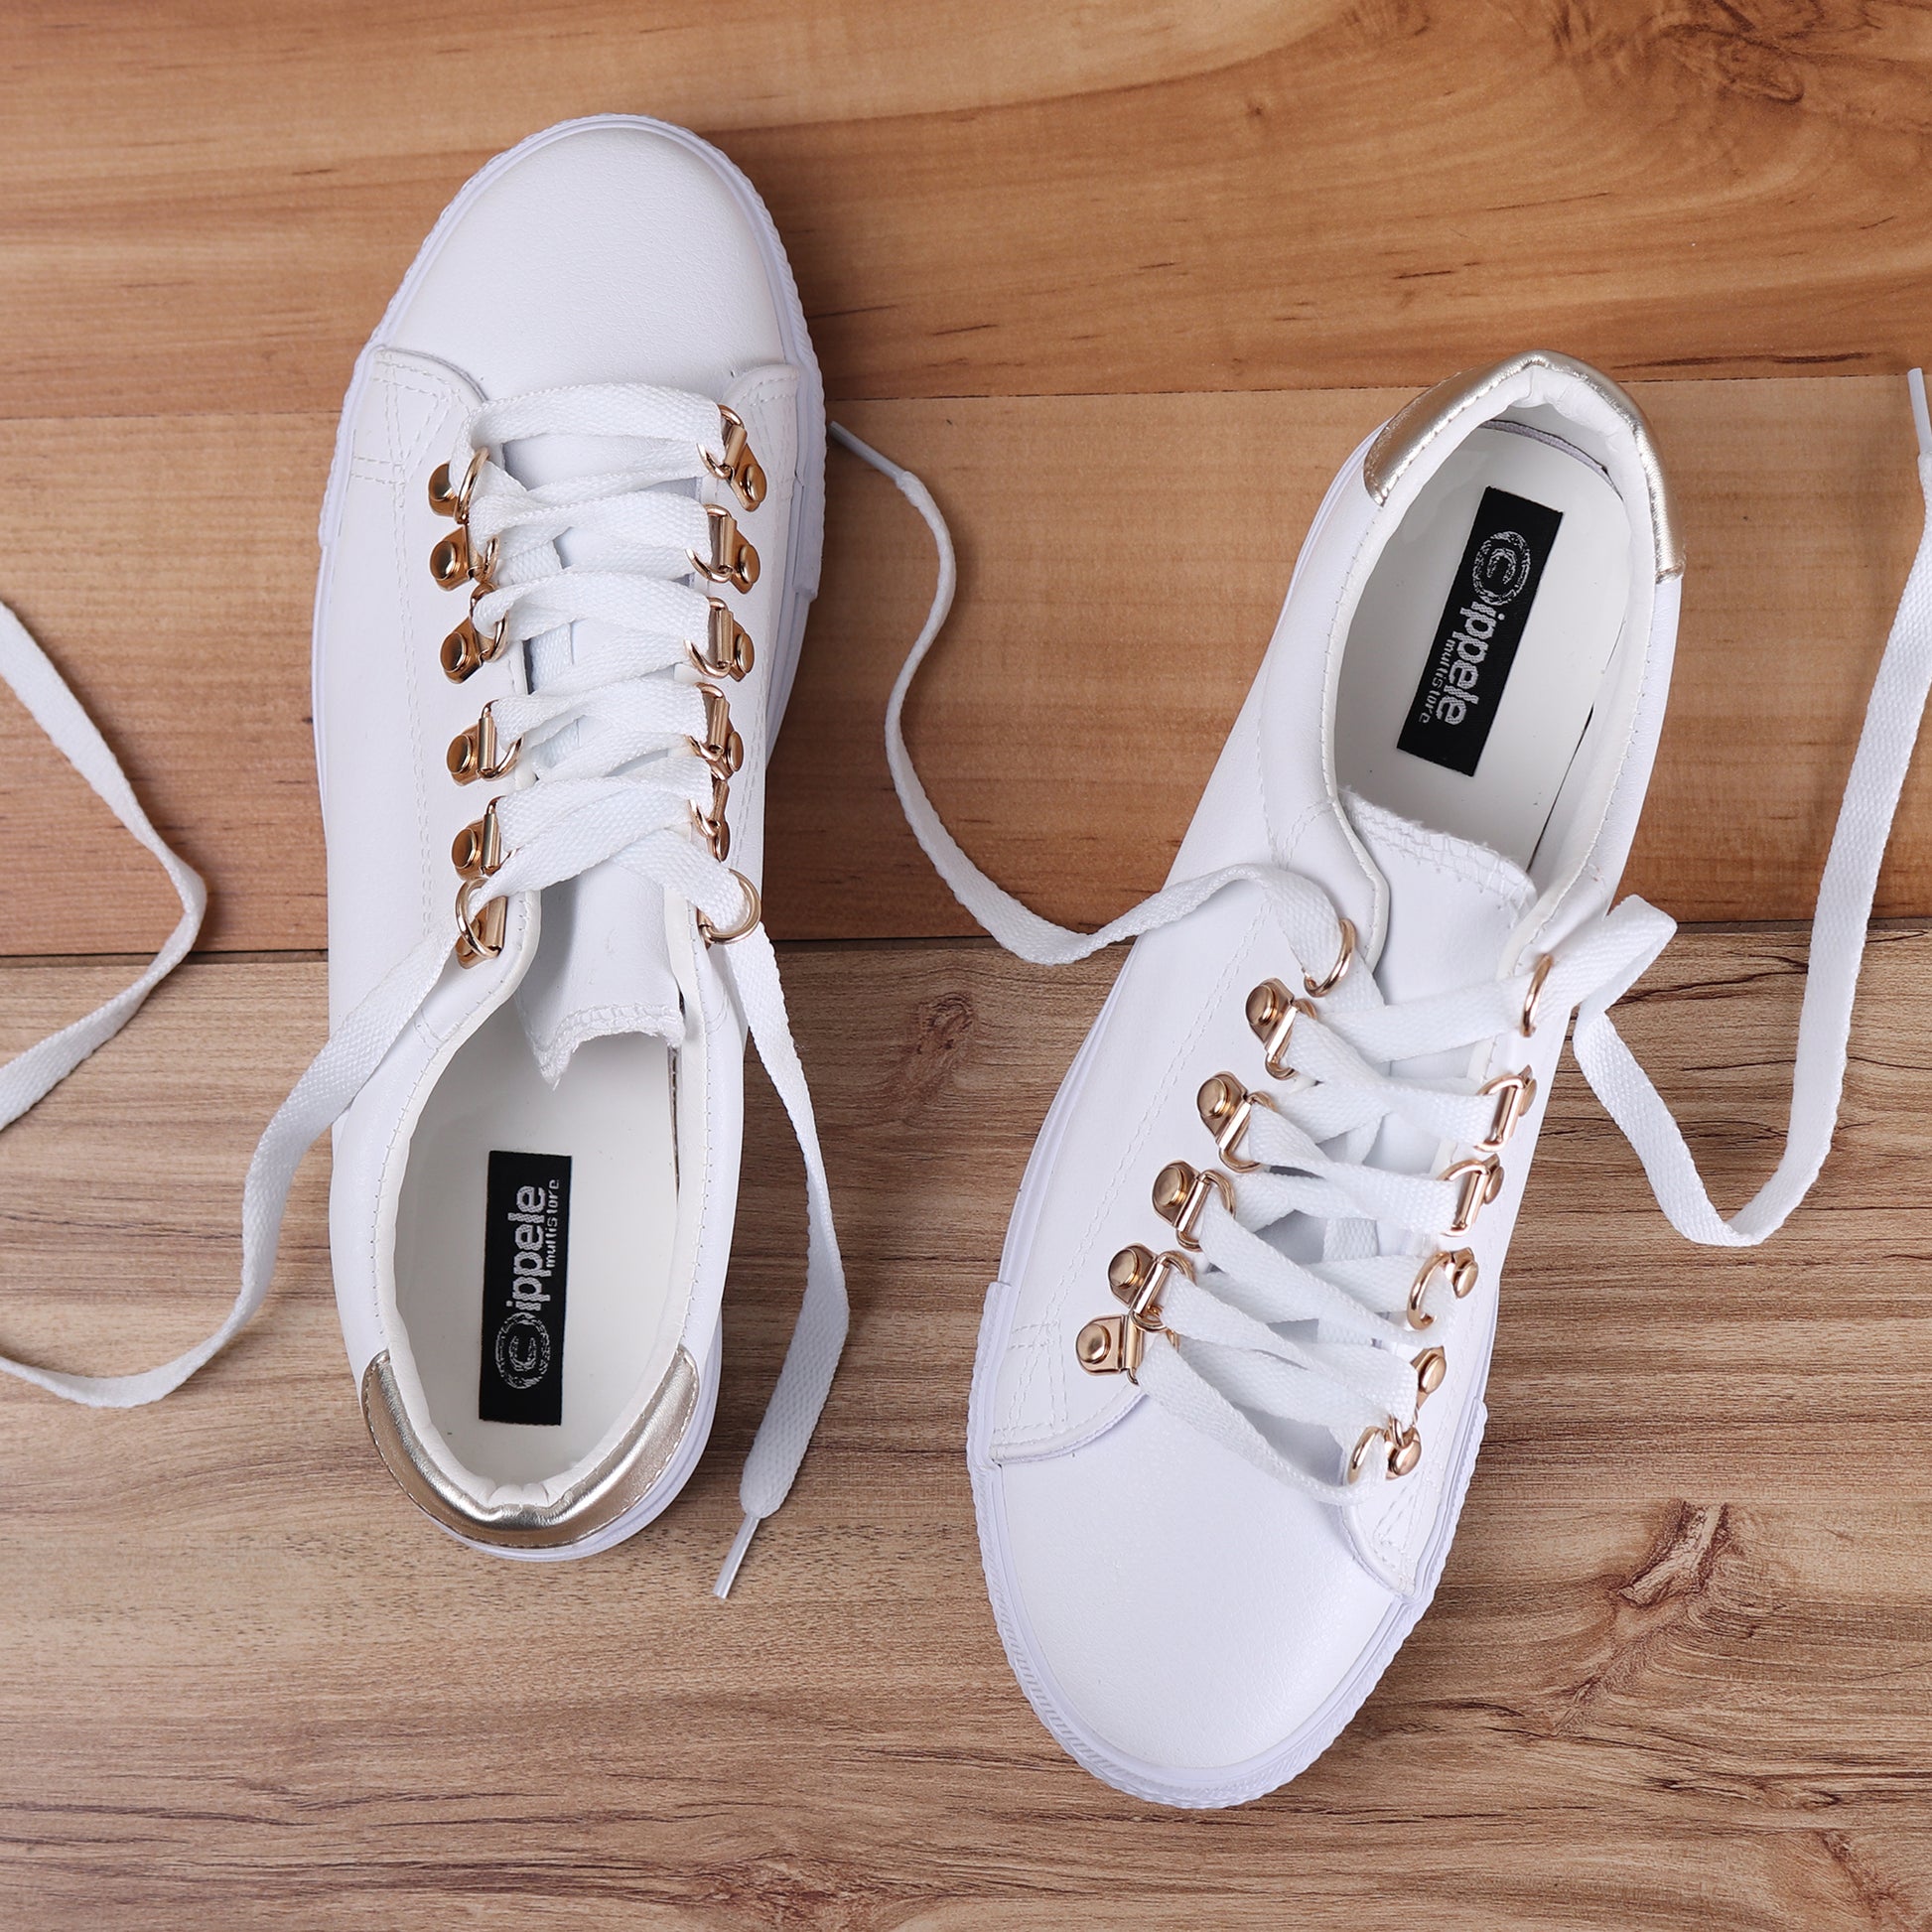 Foot Wear,White Sneaker with Golden Accents - Cippele Multi Store